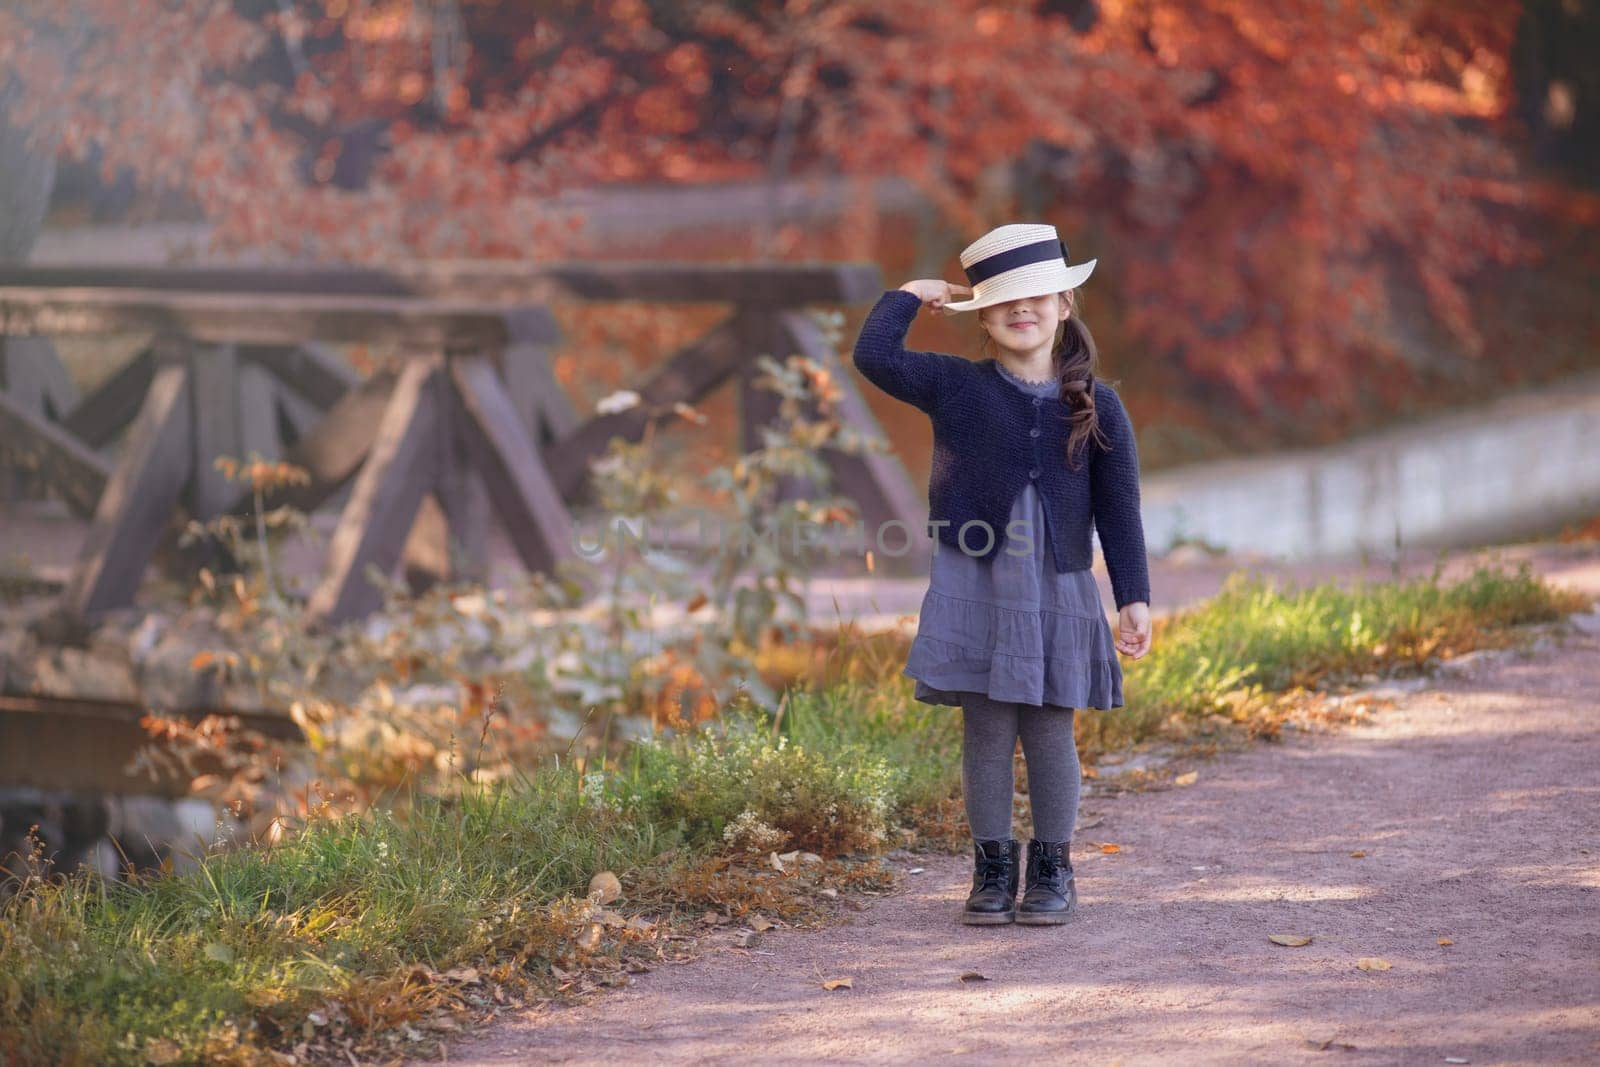 A funny little girl stands smiling in vintage clothing by Zakharova